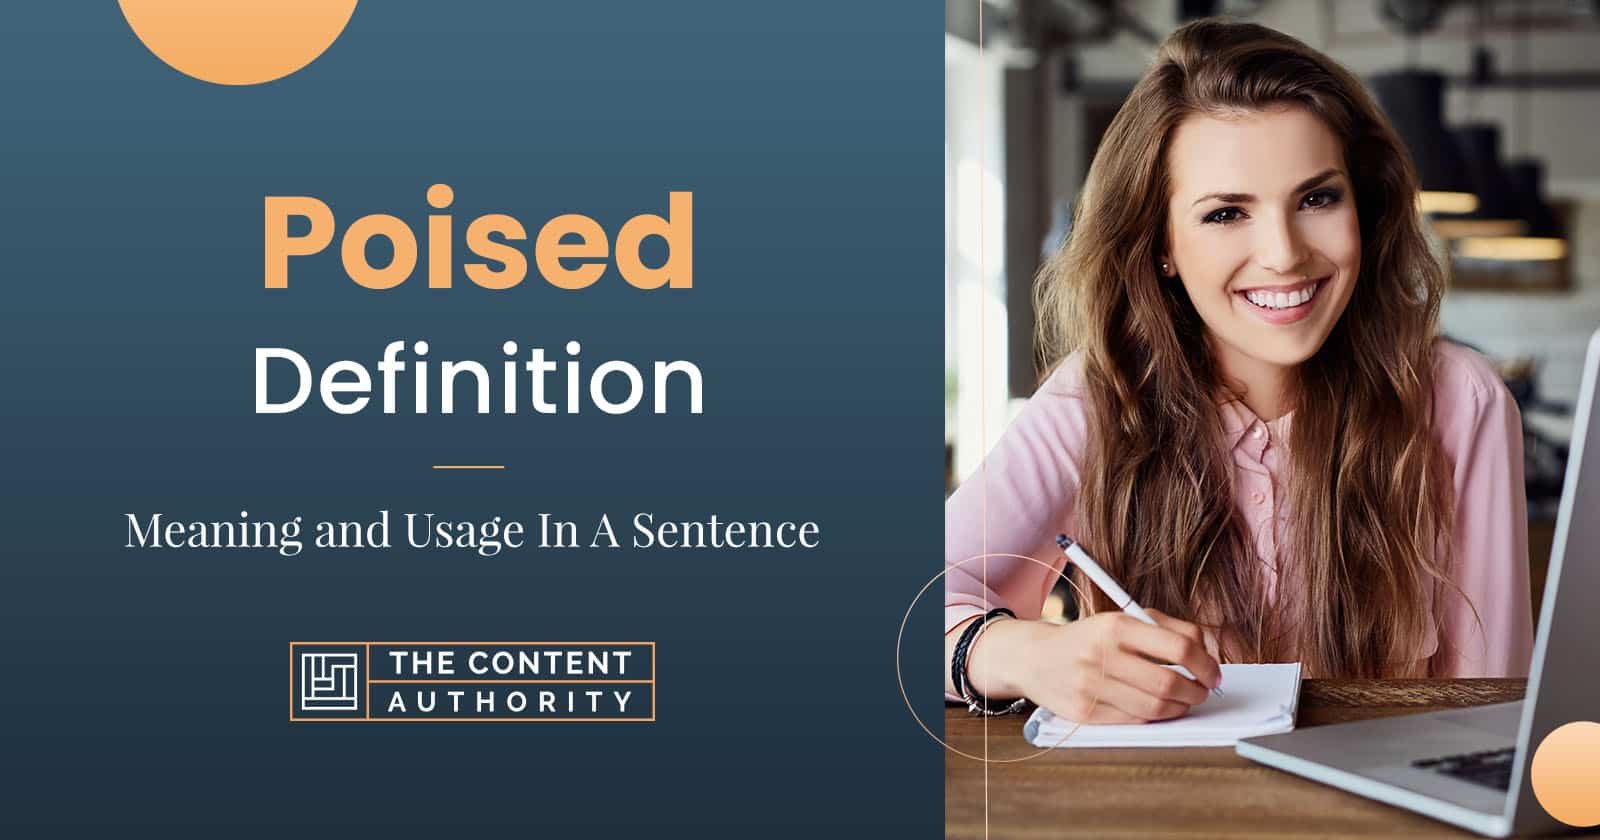 Poised Definition – Meaning and Usage in a Sentence